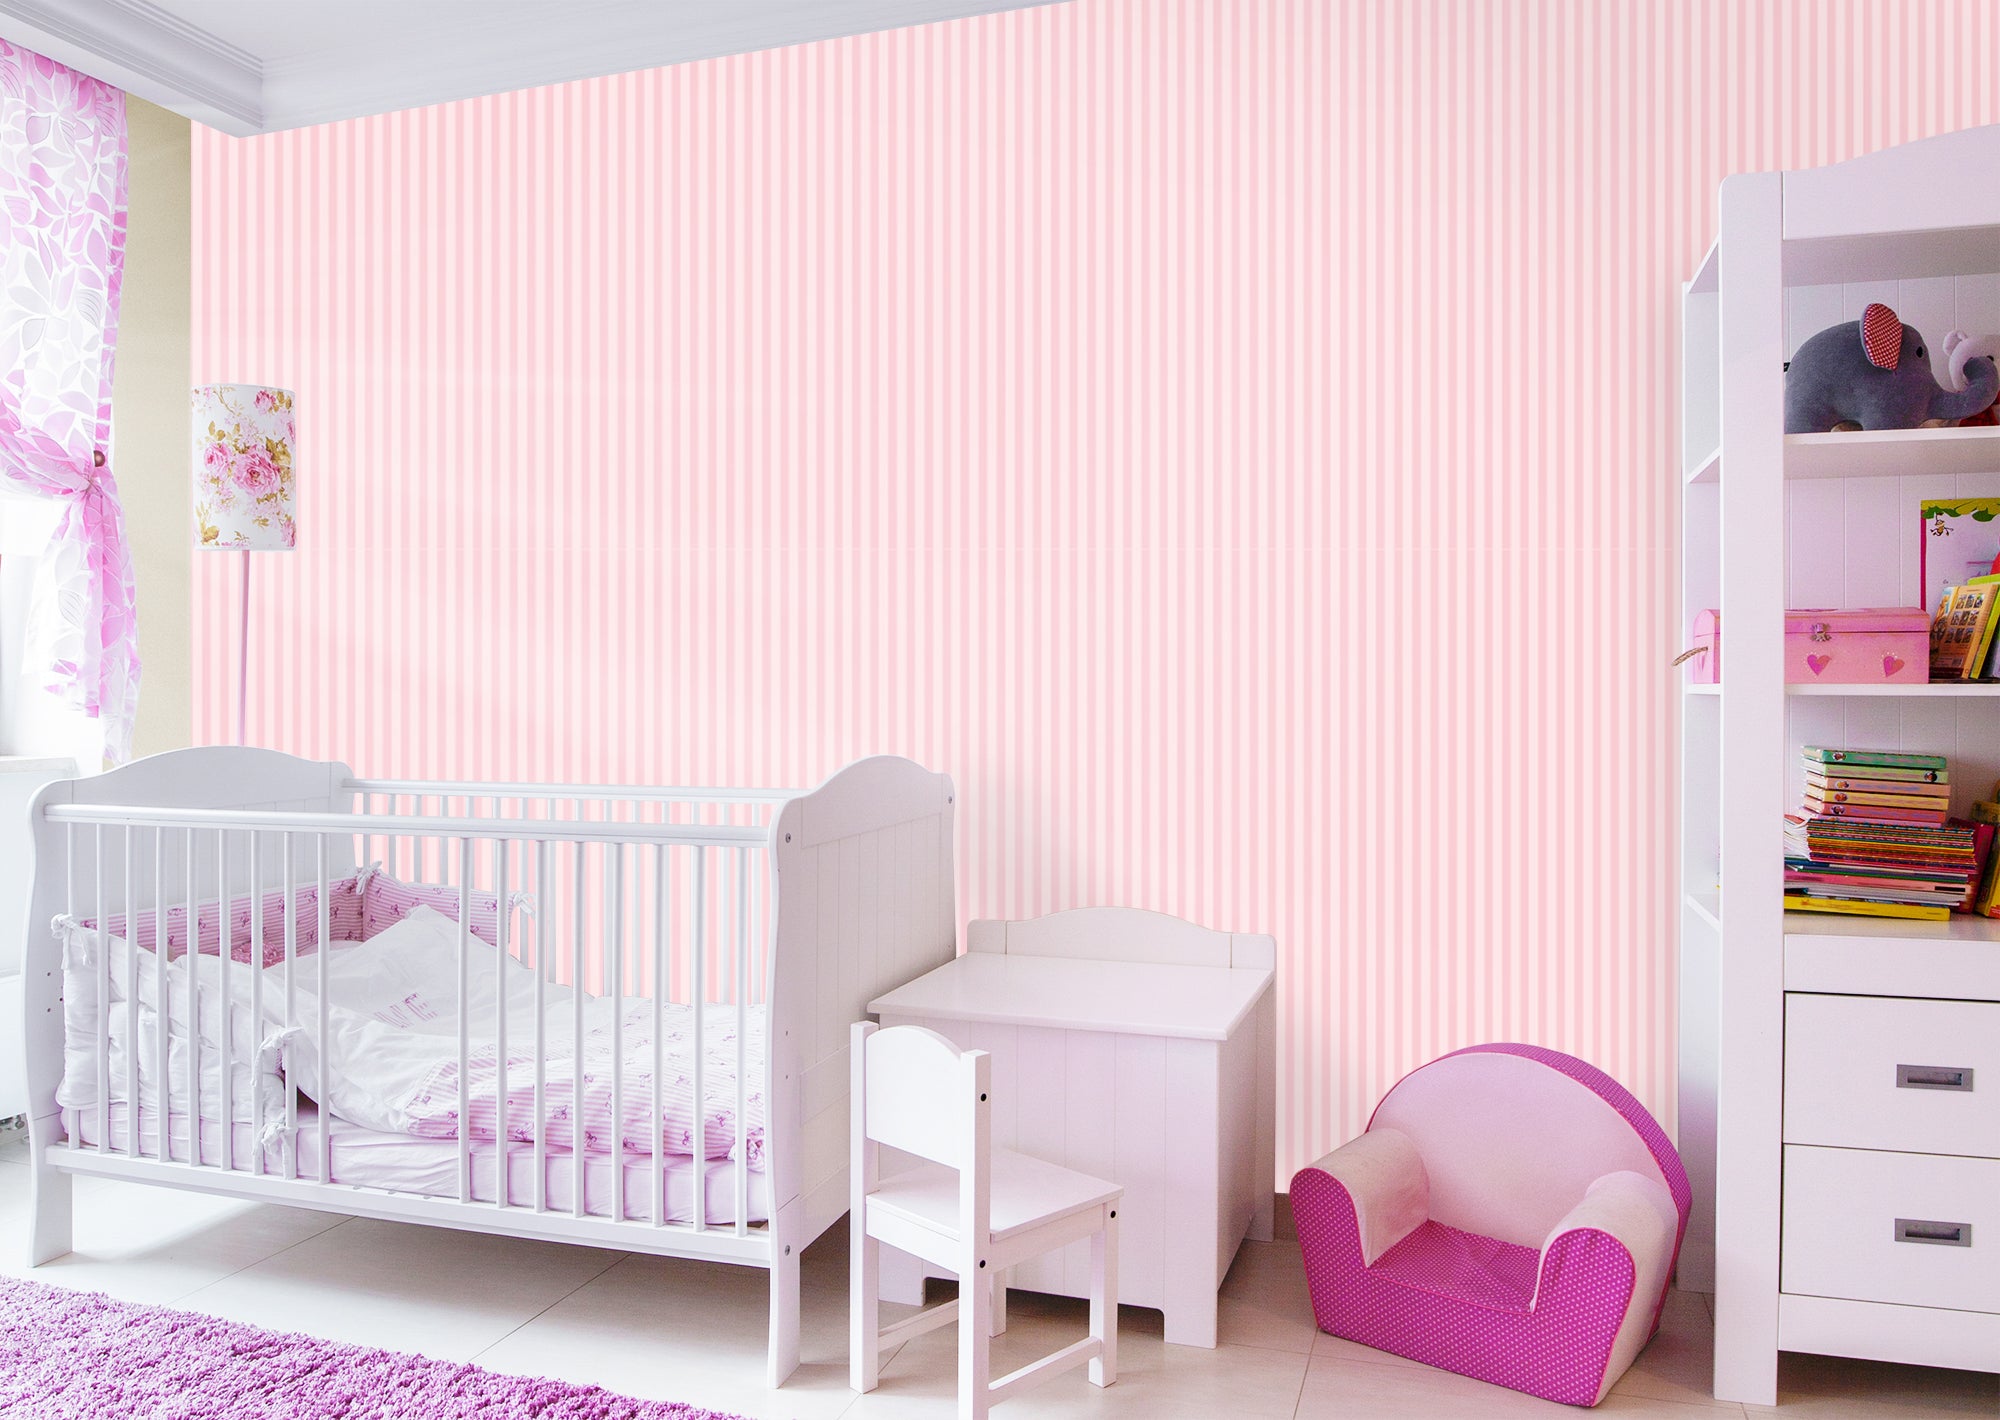 Dont Pink Twice About It - Removable Peel & Stick Wallpaper 24" x 16.5 (33 sf) by Fathead